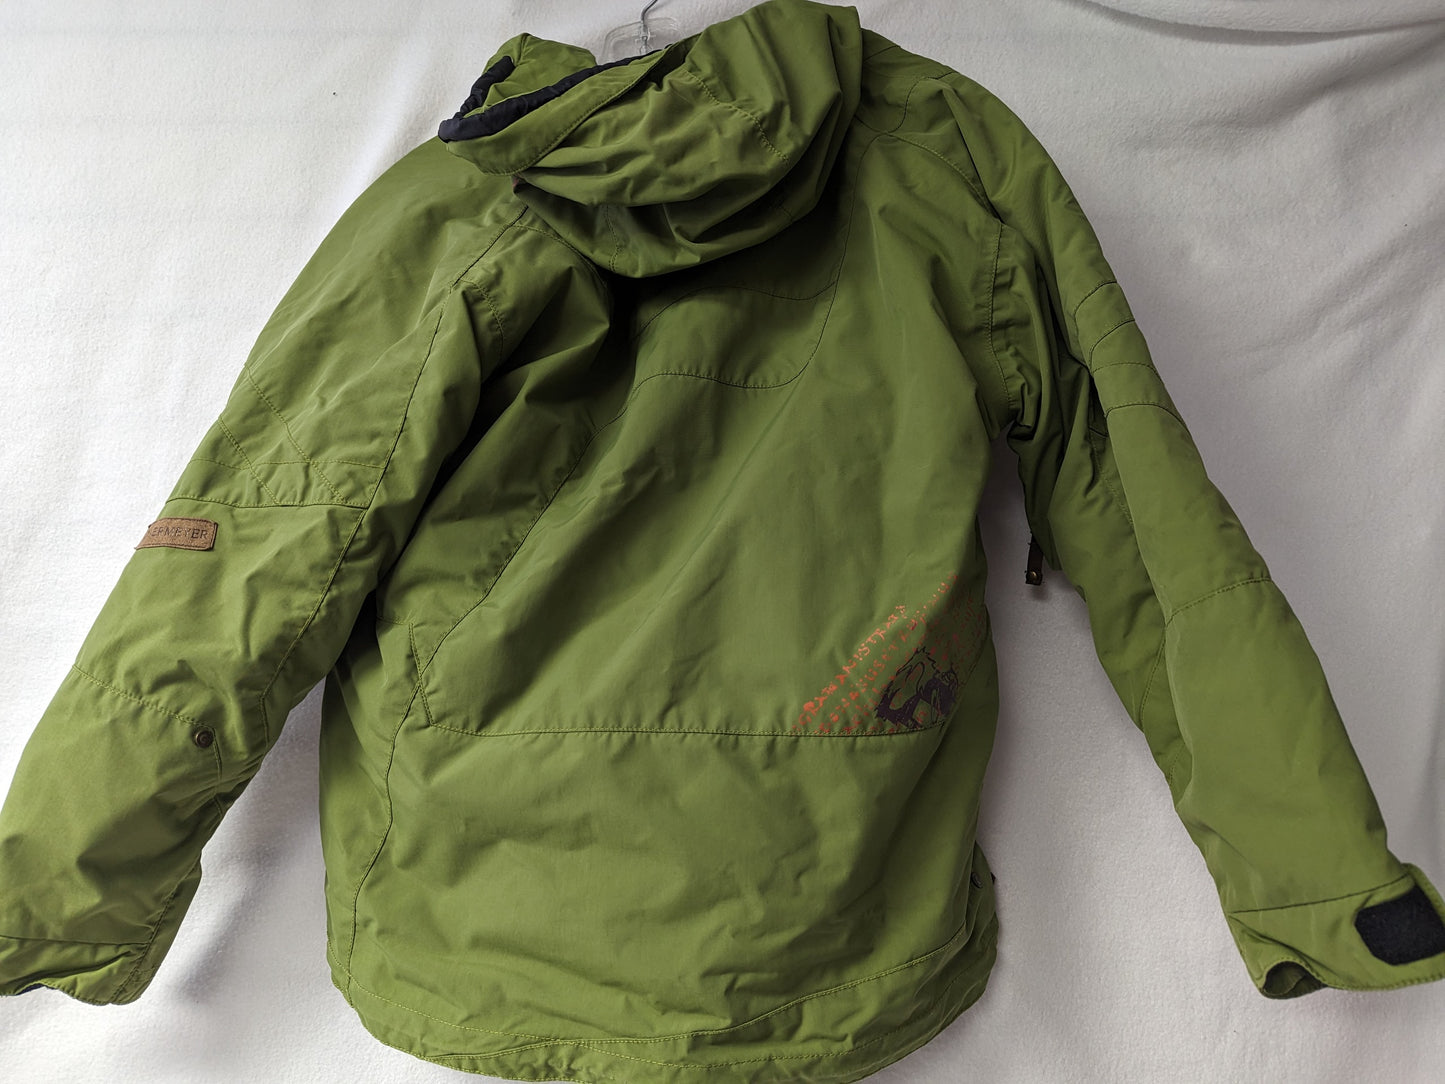 Obermeyer Hooded Ski/Board Youth Jacket/Coat Size Youth Large Color Green Condition Used